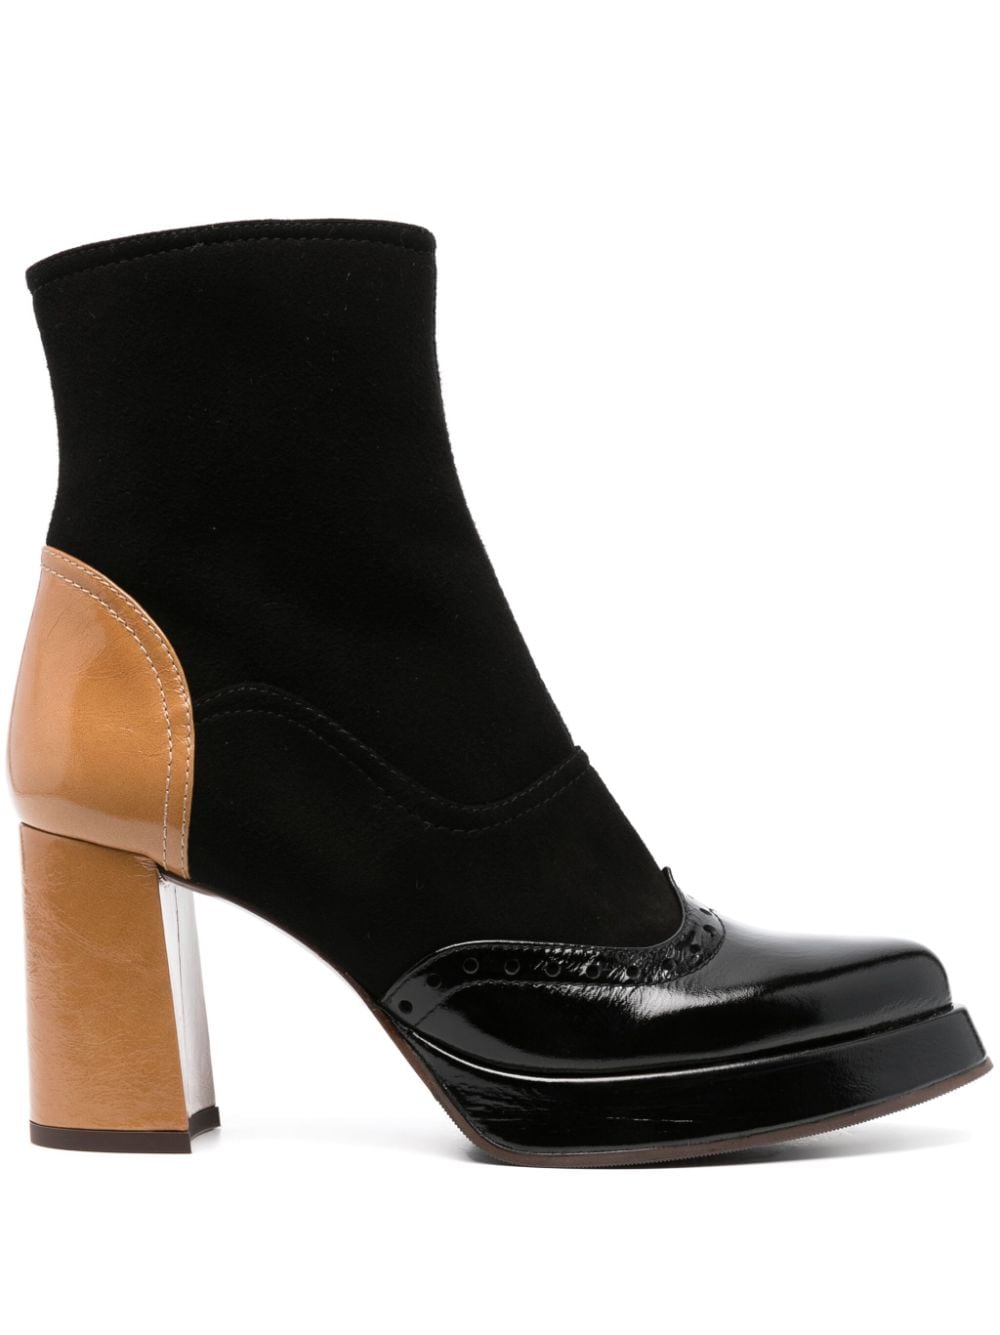 Chie Mihara 80mm Suede Panelled Leather Boots In Black